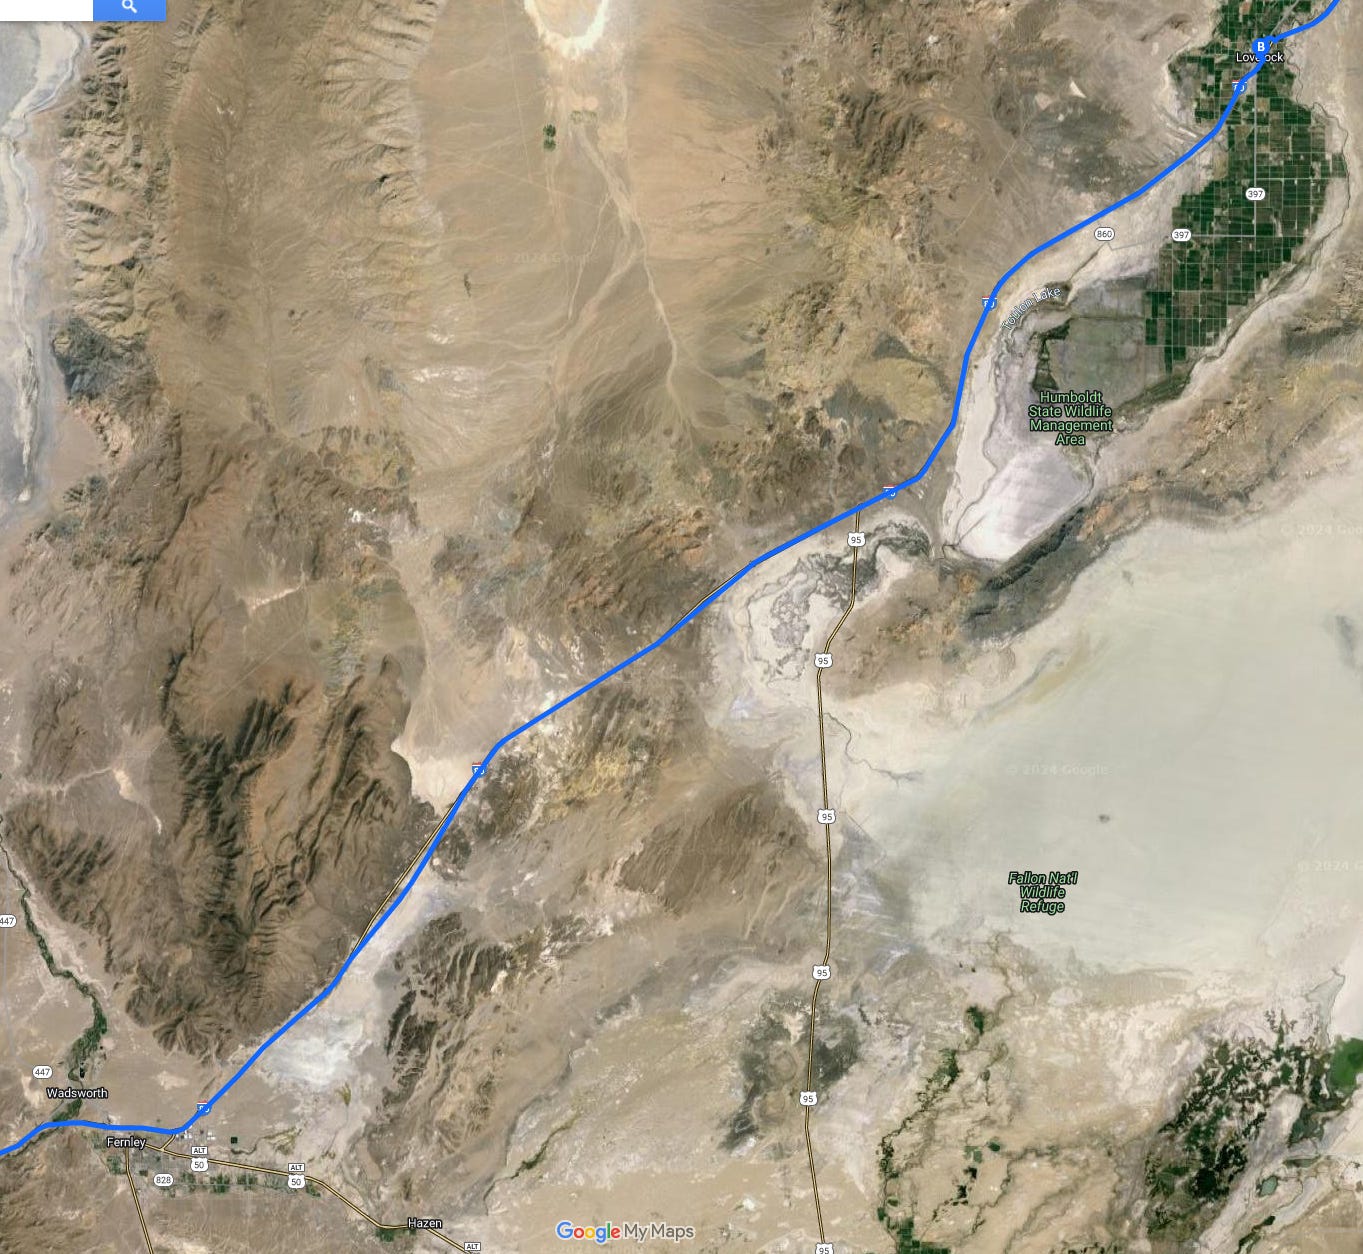 Satellite view of the Nevada desert from Fernley in the lower left to Lovelock in the upper right from Google Maps. A blue line representing the route runs from the lower left to upper right of the image. There are a couple of roads running north and south into Fernley and Wadsworth in the lower left. There is another road - labeled 95- running up from the bottom center to the blue line. There are no other roads. The majority of the image is barren desert - white sands, tan soils, a dark ridge of hills in the lower left, and a line of green near Wadworth in the lower left marking a river. In the upper right, leading to Lovelock, is an oblong area - a green grid of irrigated fields. The blue line extends beyond Lovelock orr the upper right corner of the image.